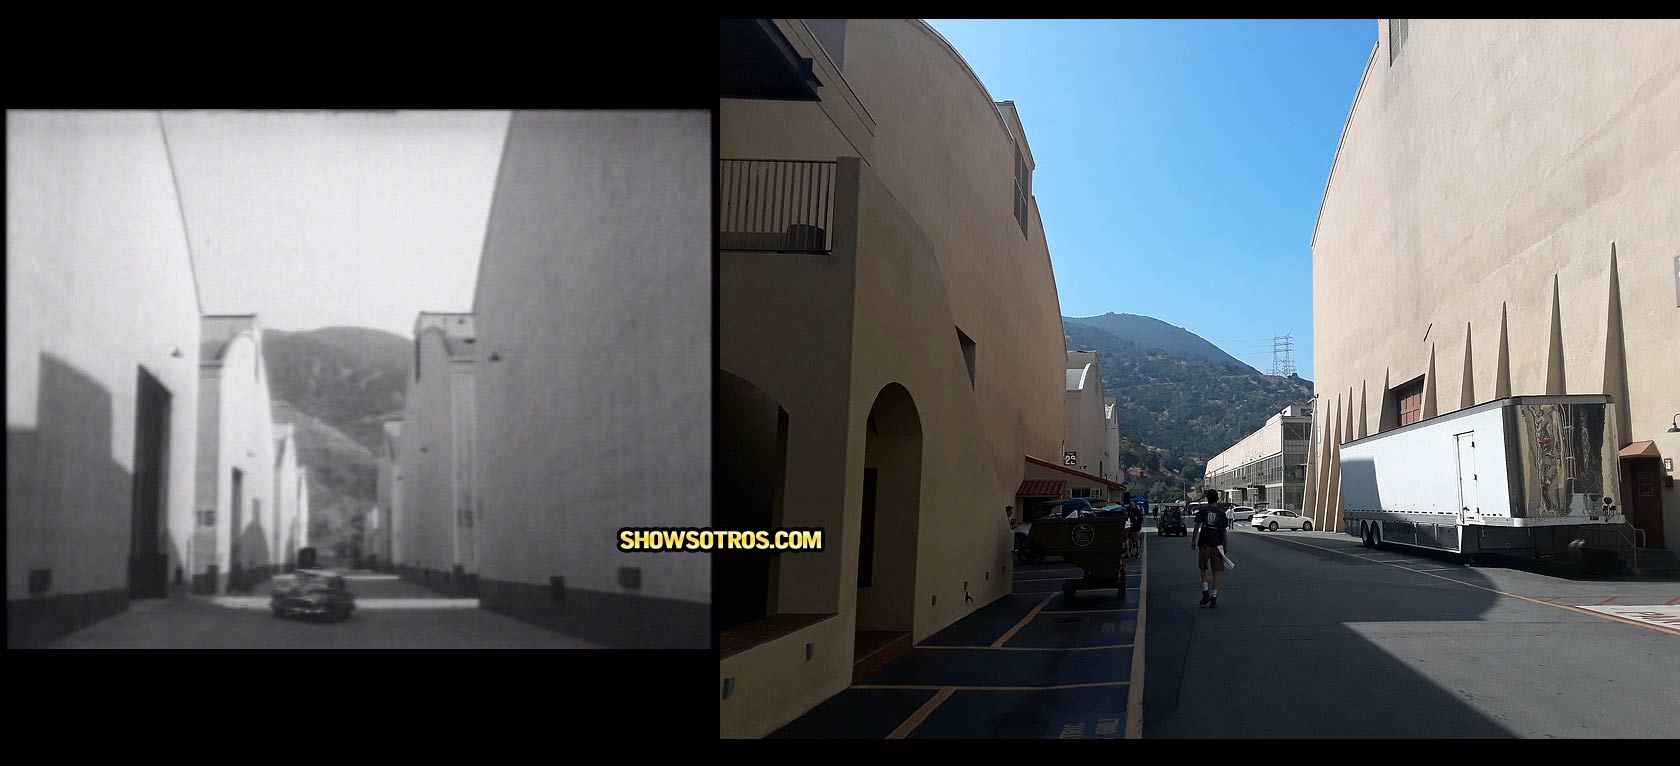 Warner Bros. studio lot back then and now.